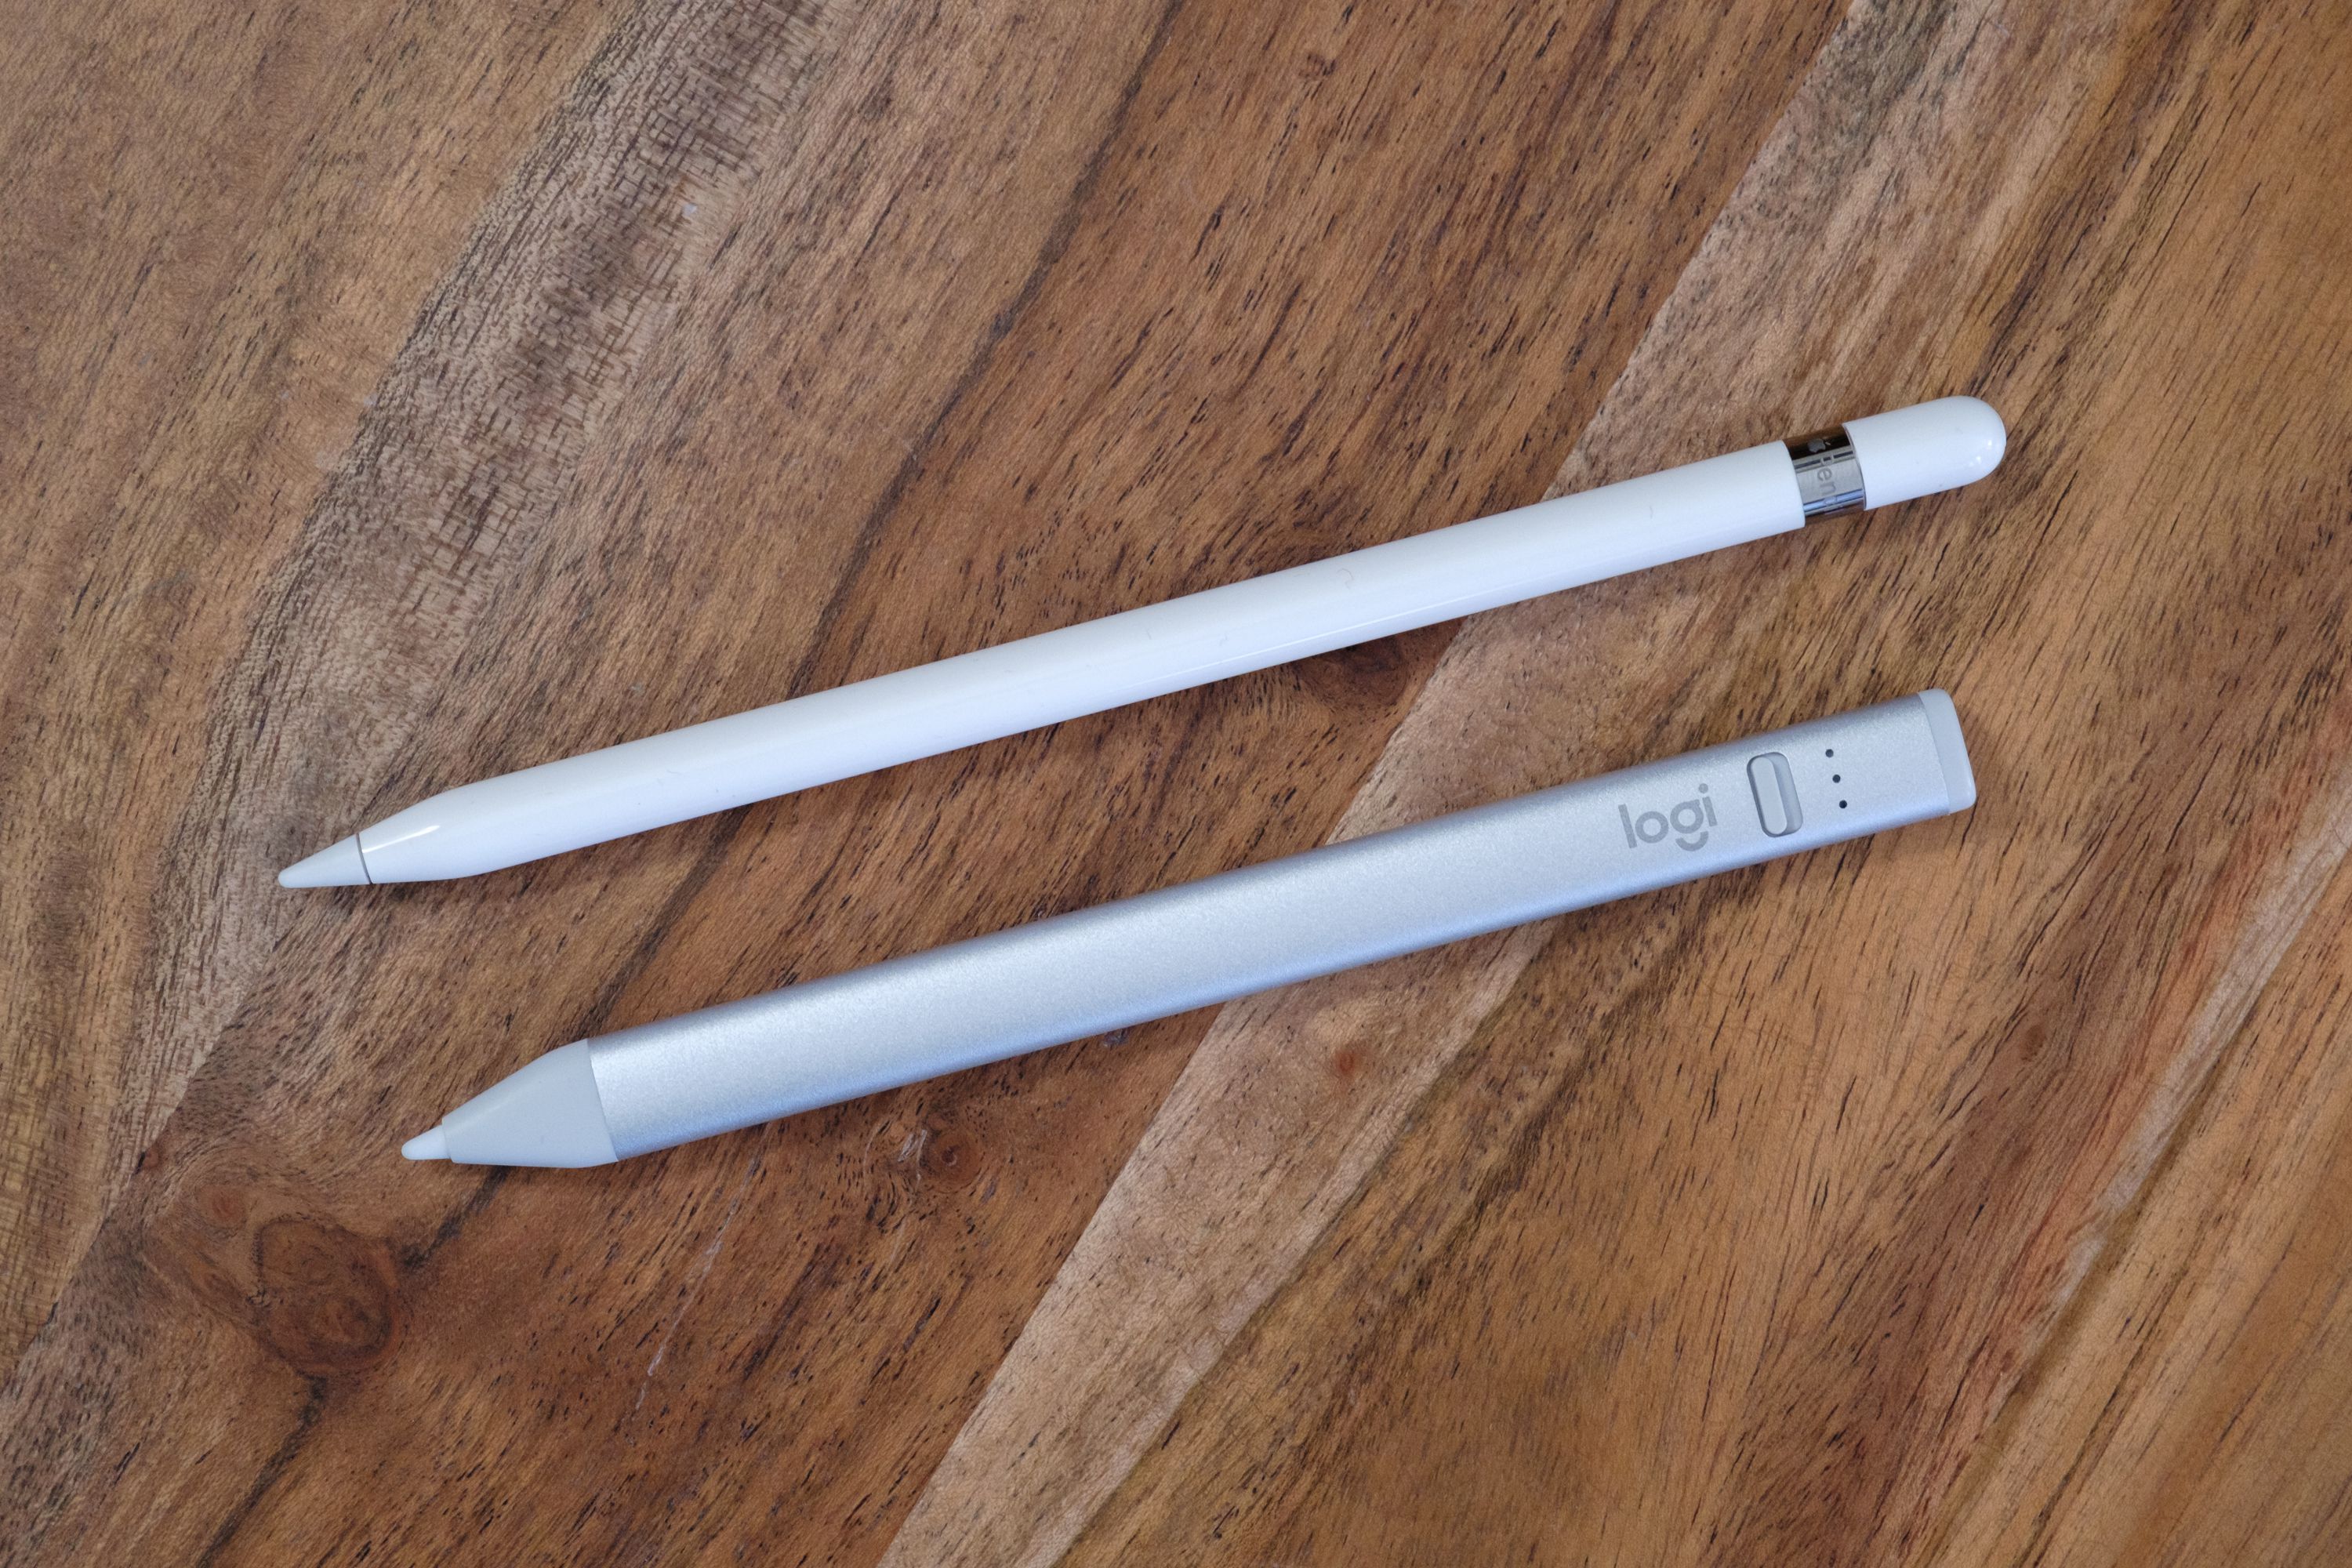 Logitech Crayon next to the 1st generation Apple Pencil on a wooden table, top view.